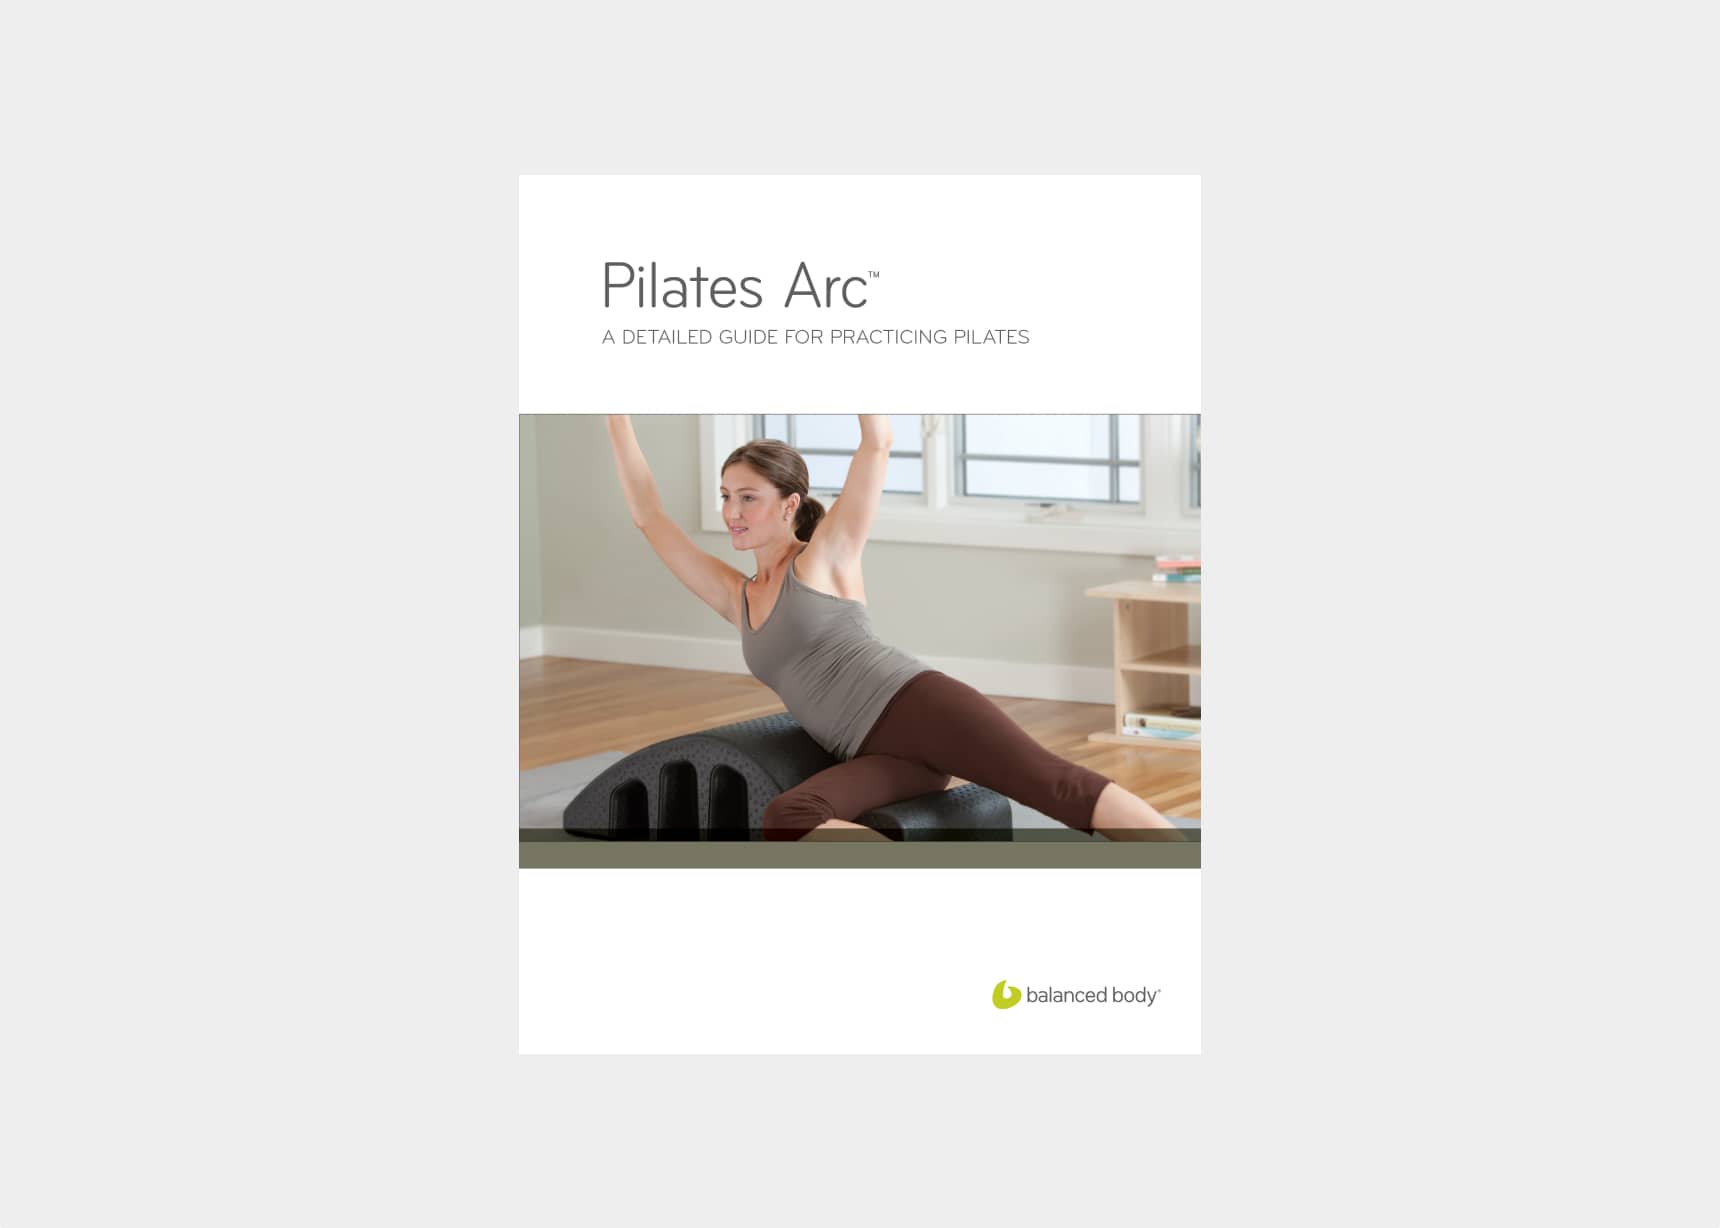 Pilates Arc, a detailed guide for practicing pilates